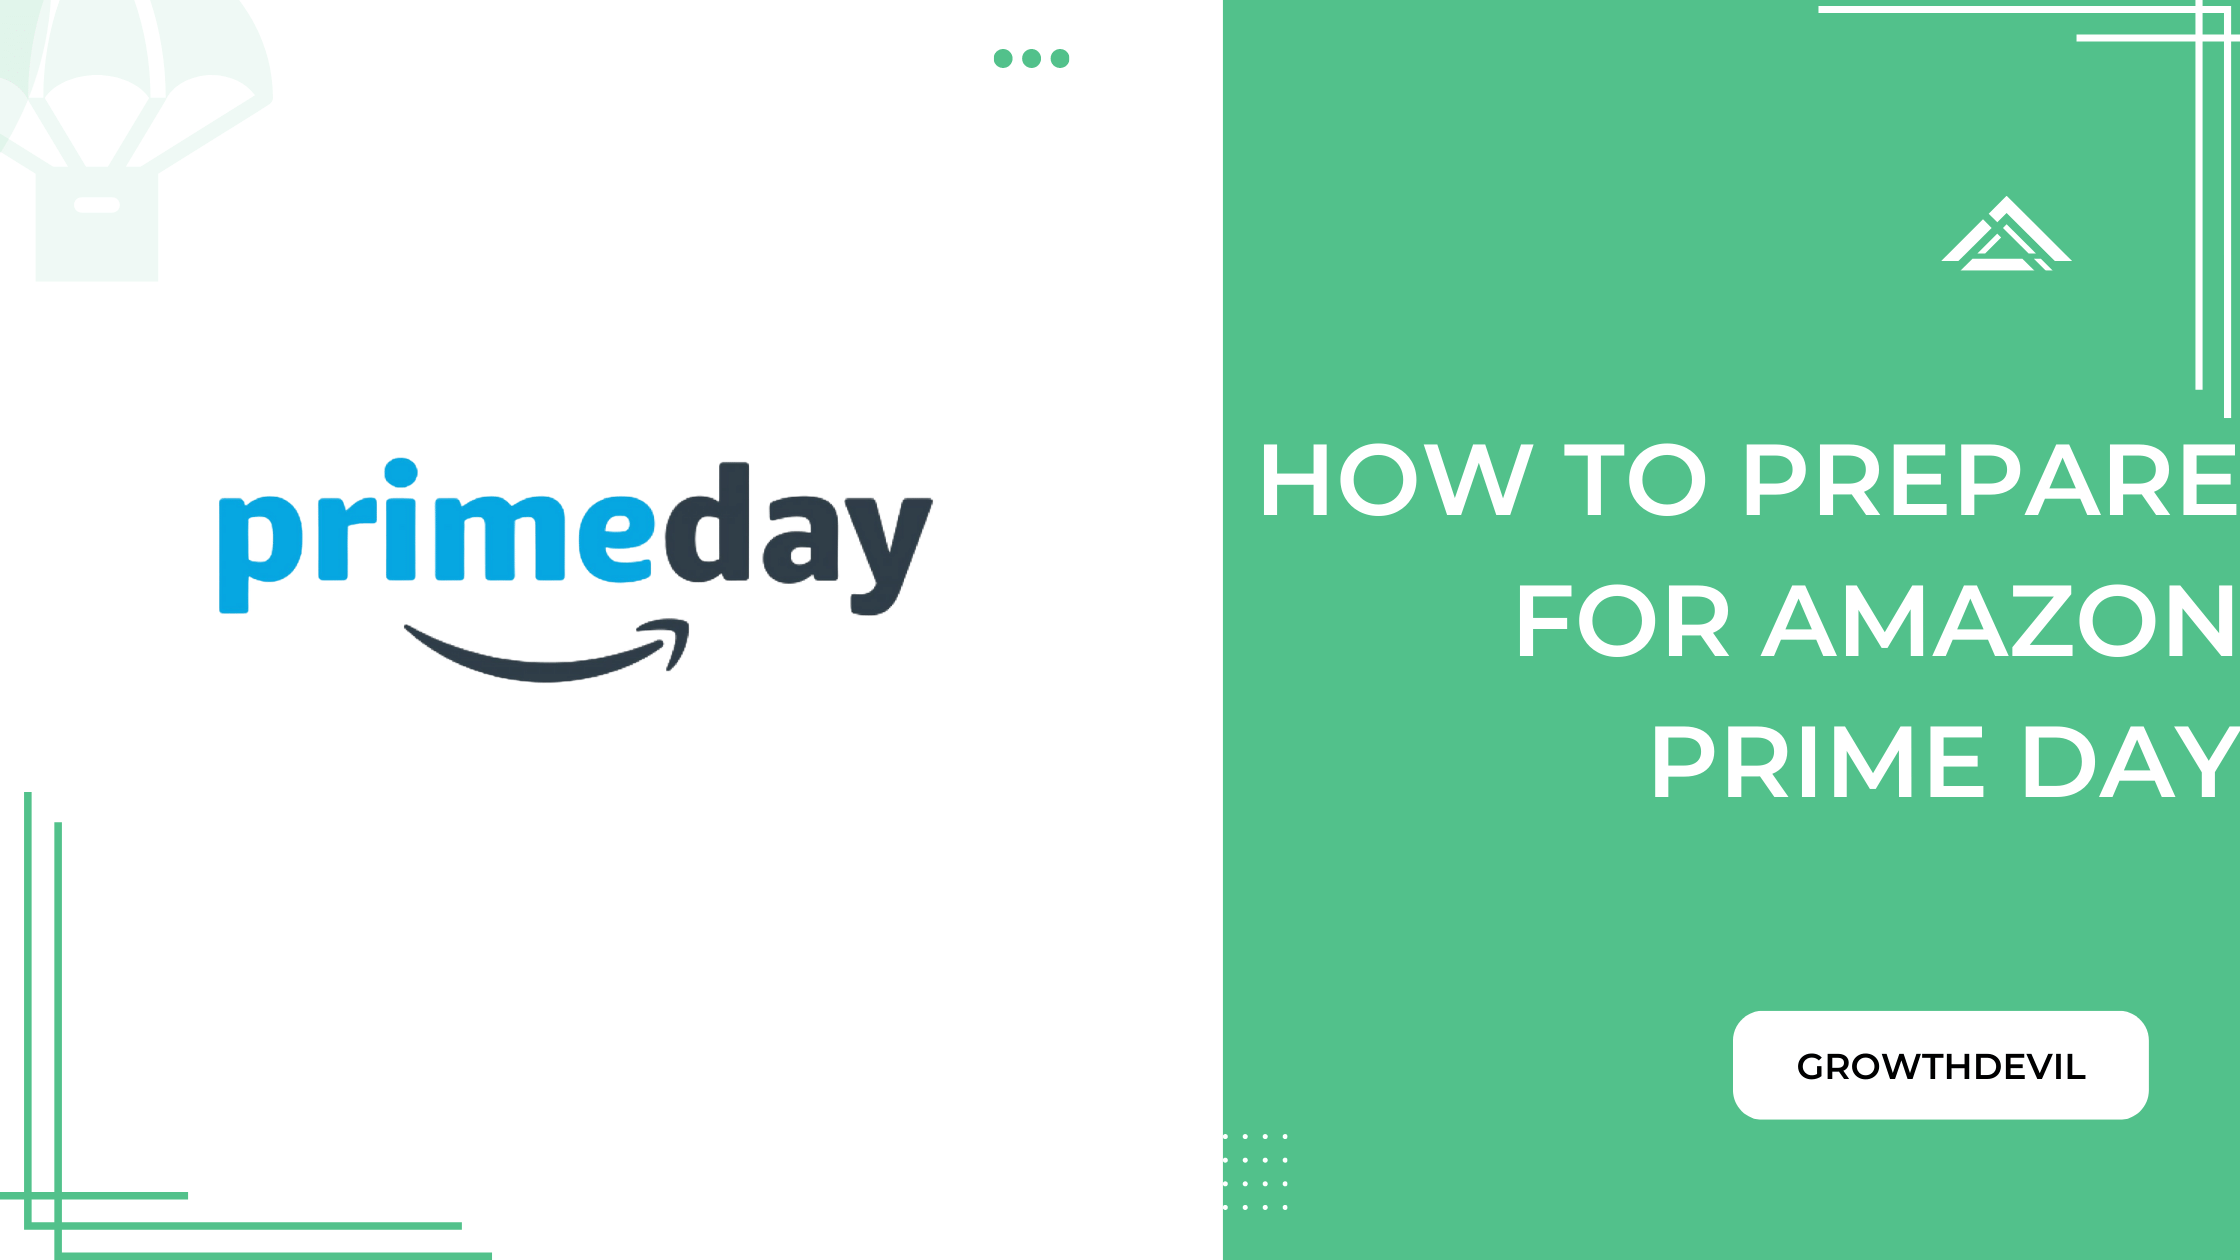 How To Prepare For Amazon Prime Day - GrowthDevil